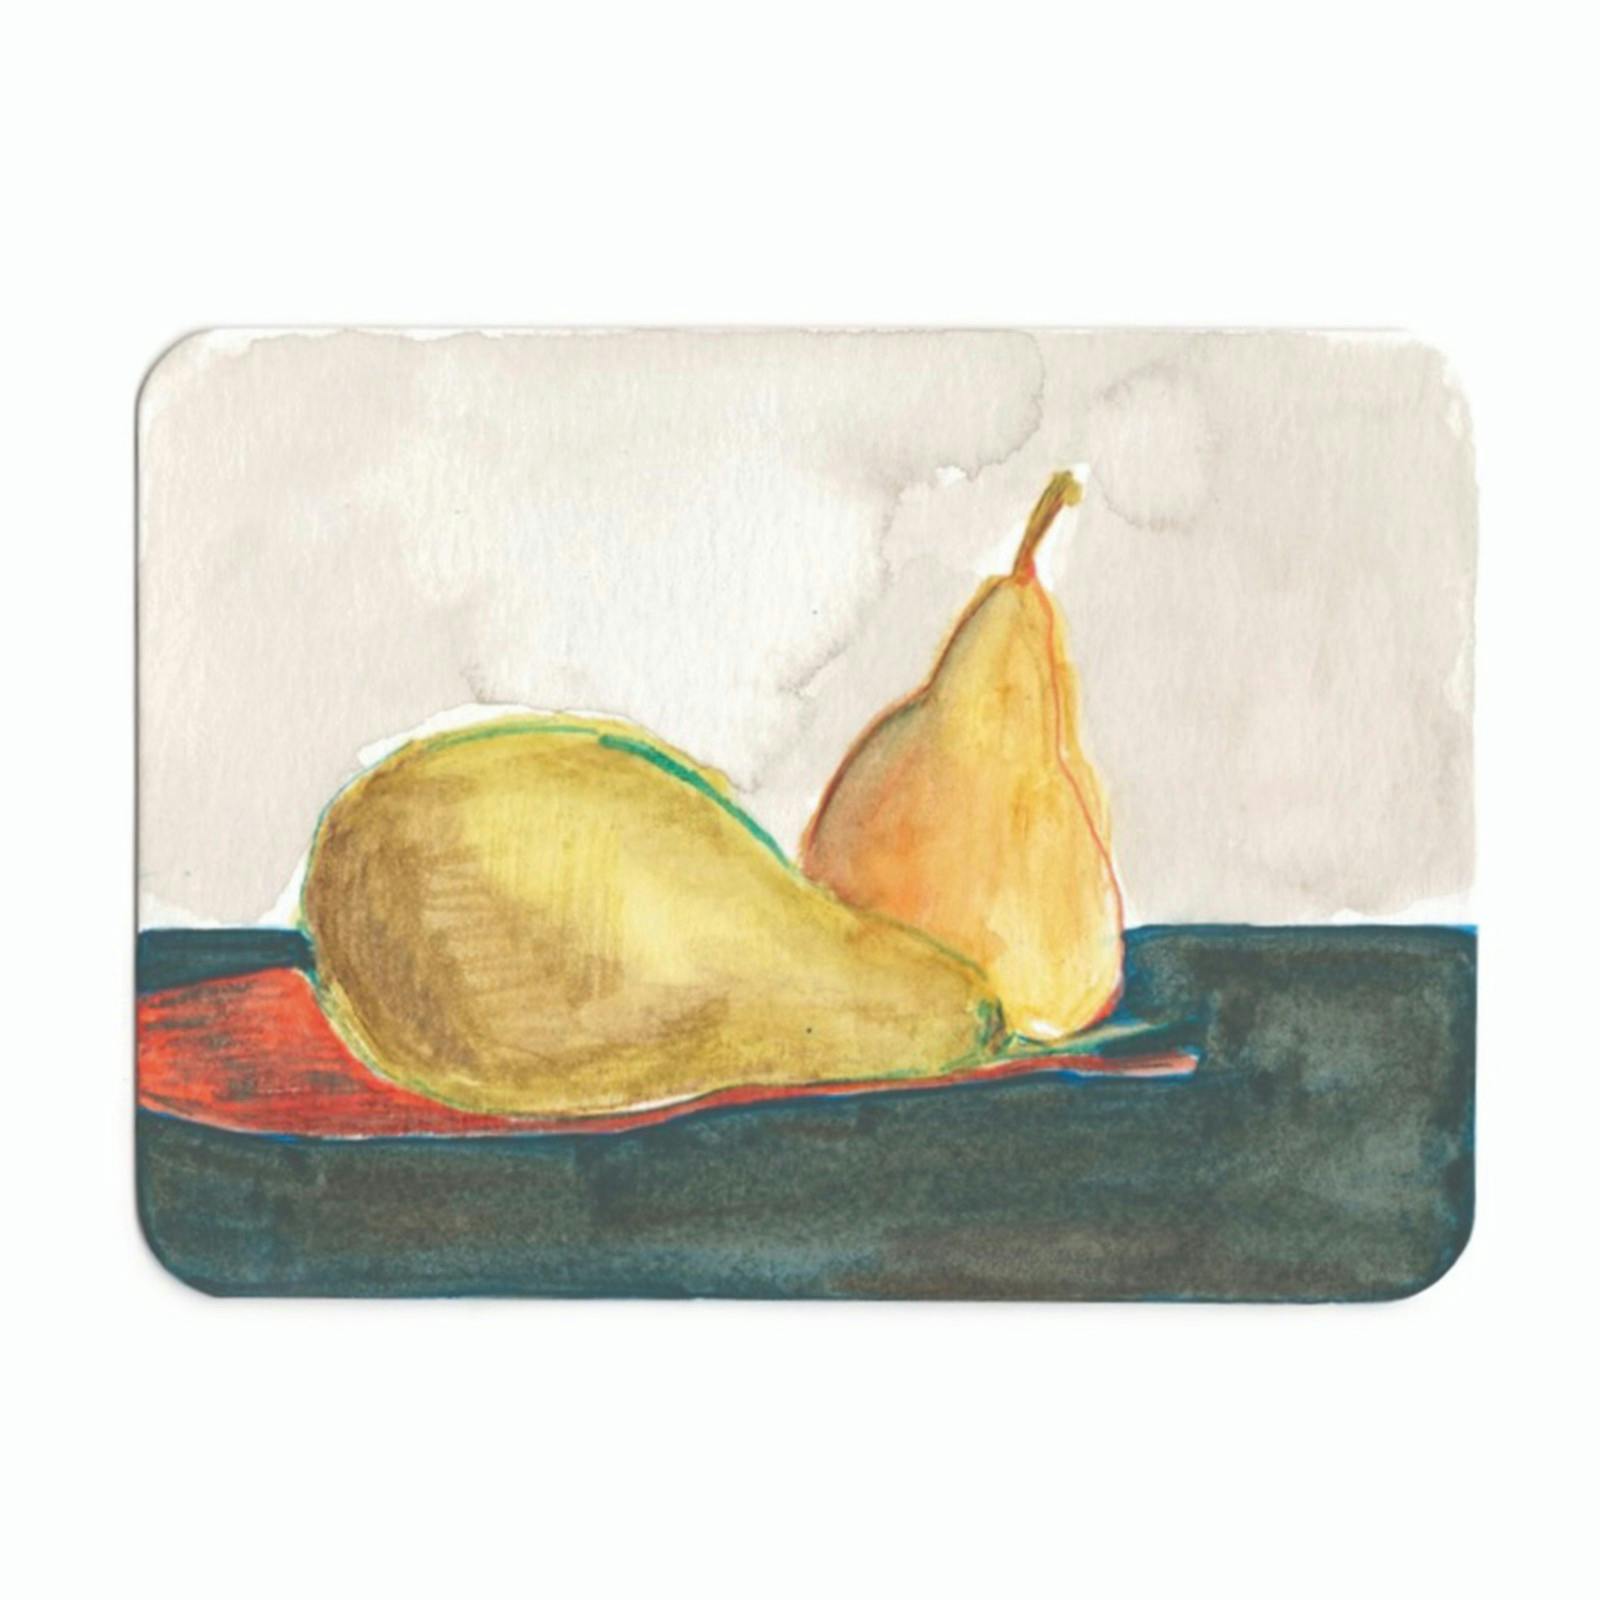 TWO PEARS ON THE TABLE